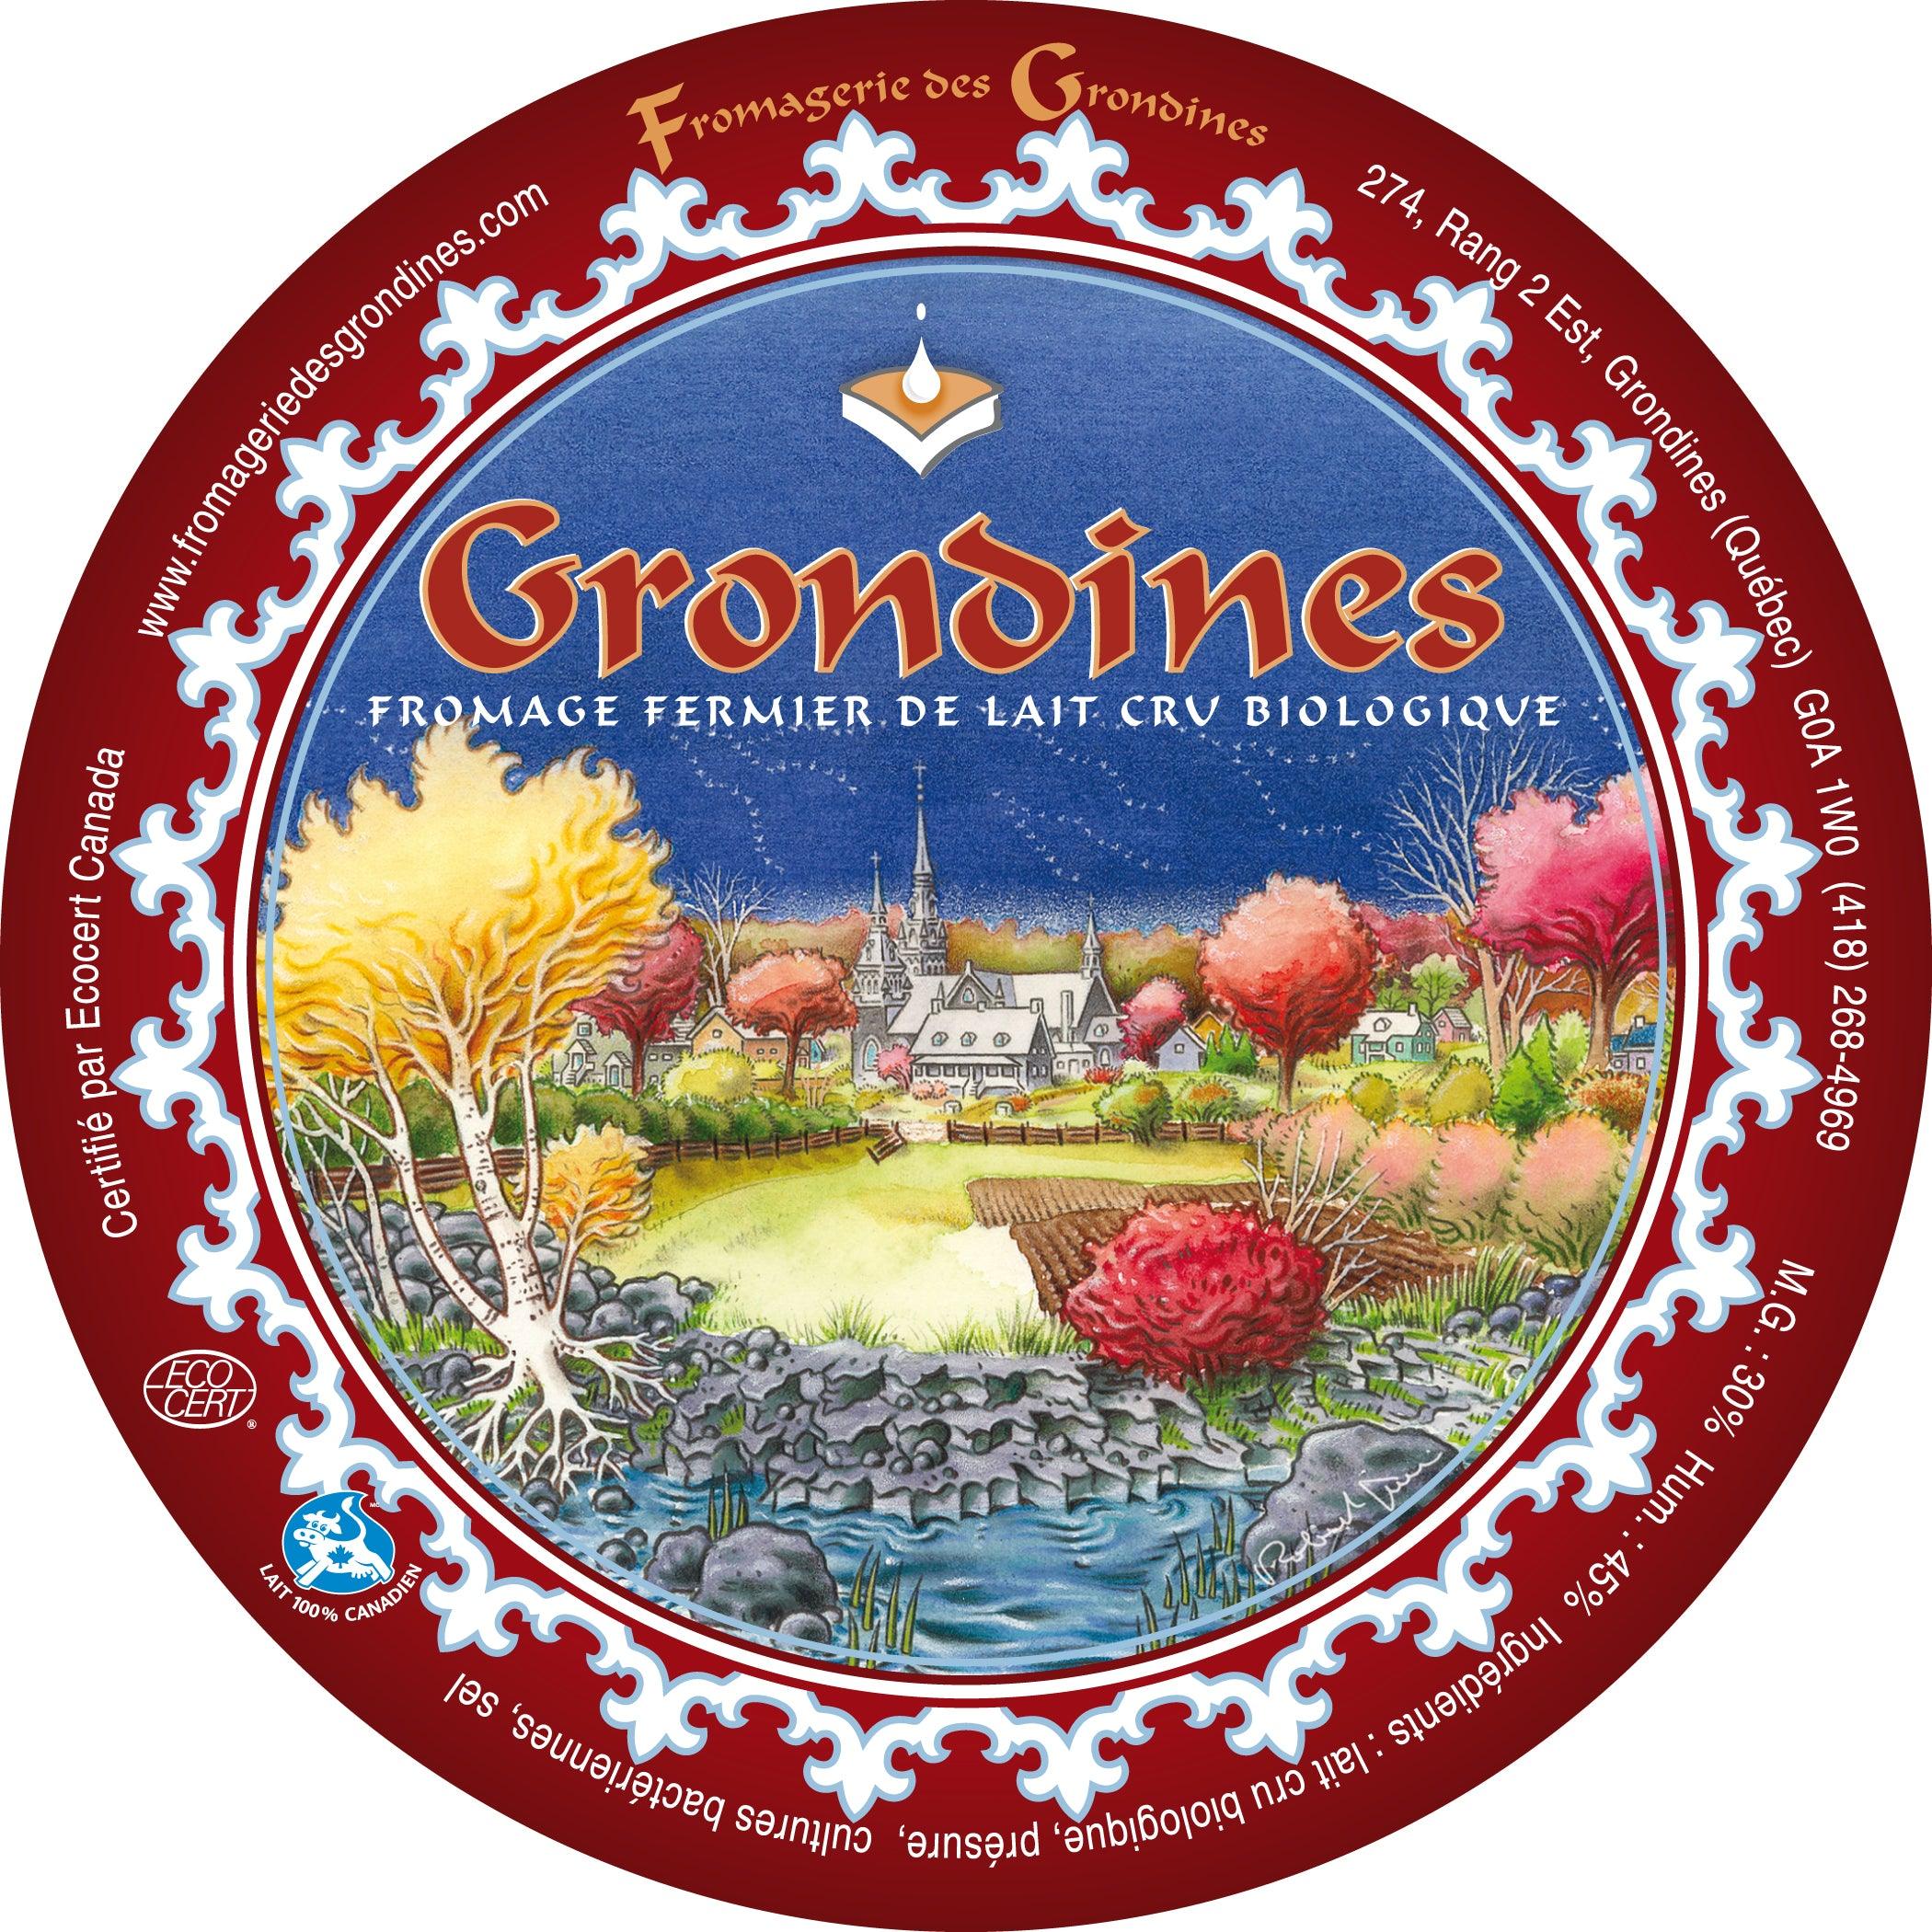 Grondines - Réserve - Fromagerie des Grondines